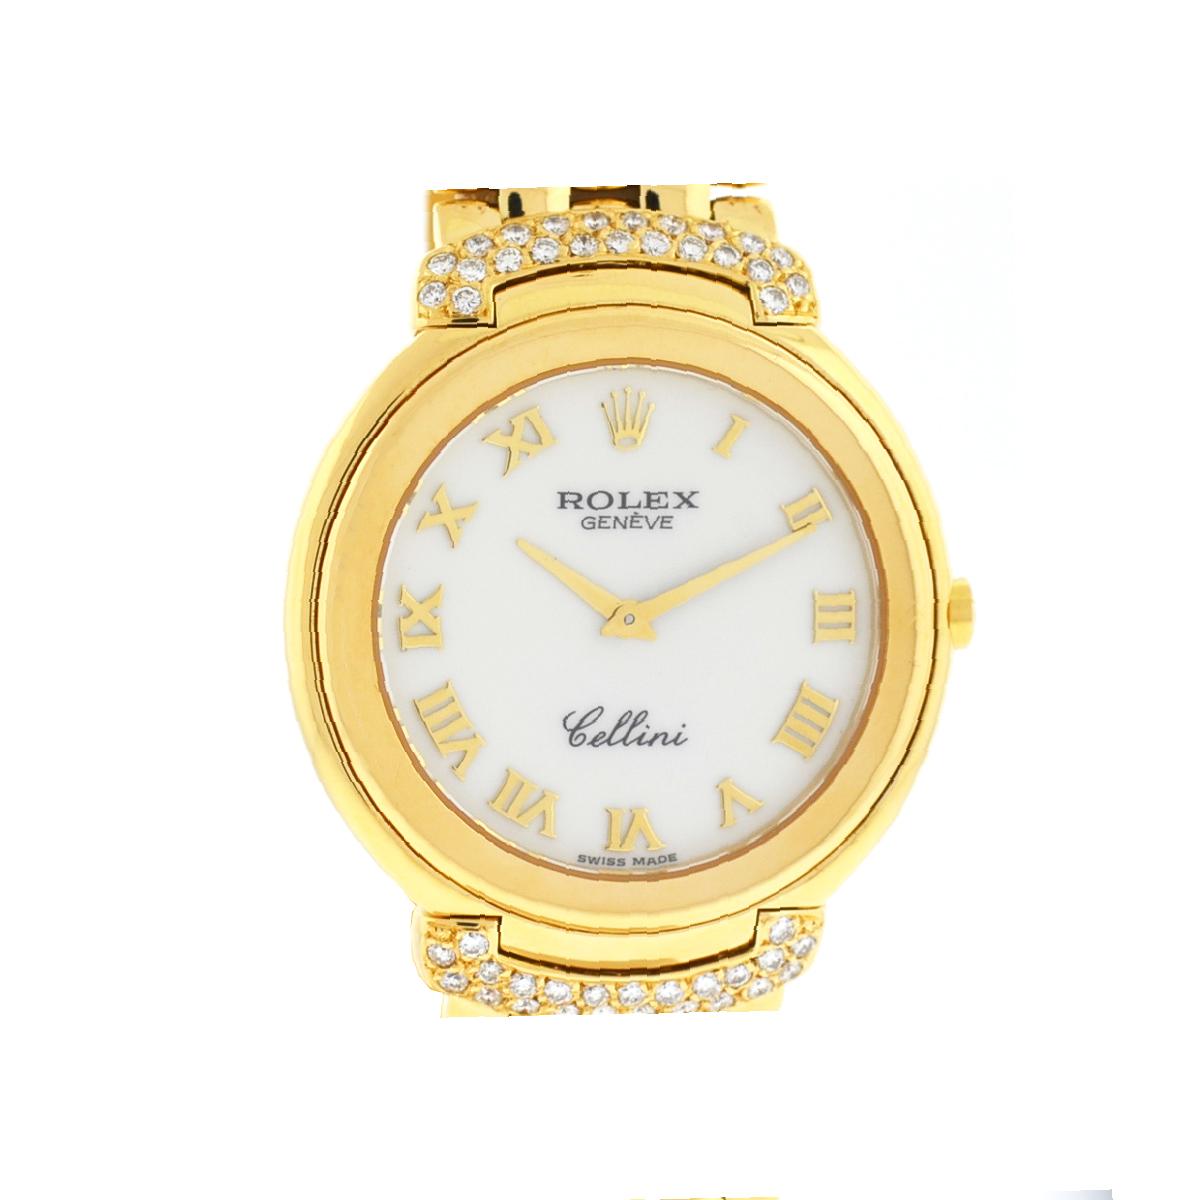 Company-Rolex
Style-Luxury Watch
Model-Cellini
Reference Number-6623
Case Metal-18k Yellow Gold
Case Measurement-36mm
Bracelet-18k Yellow Gold with Diamond Lugs - Fits 7 1/4